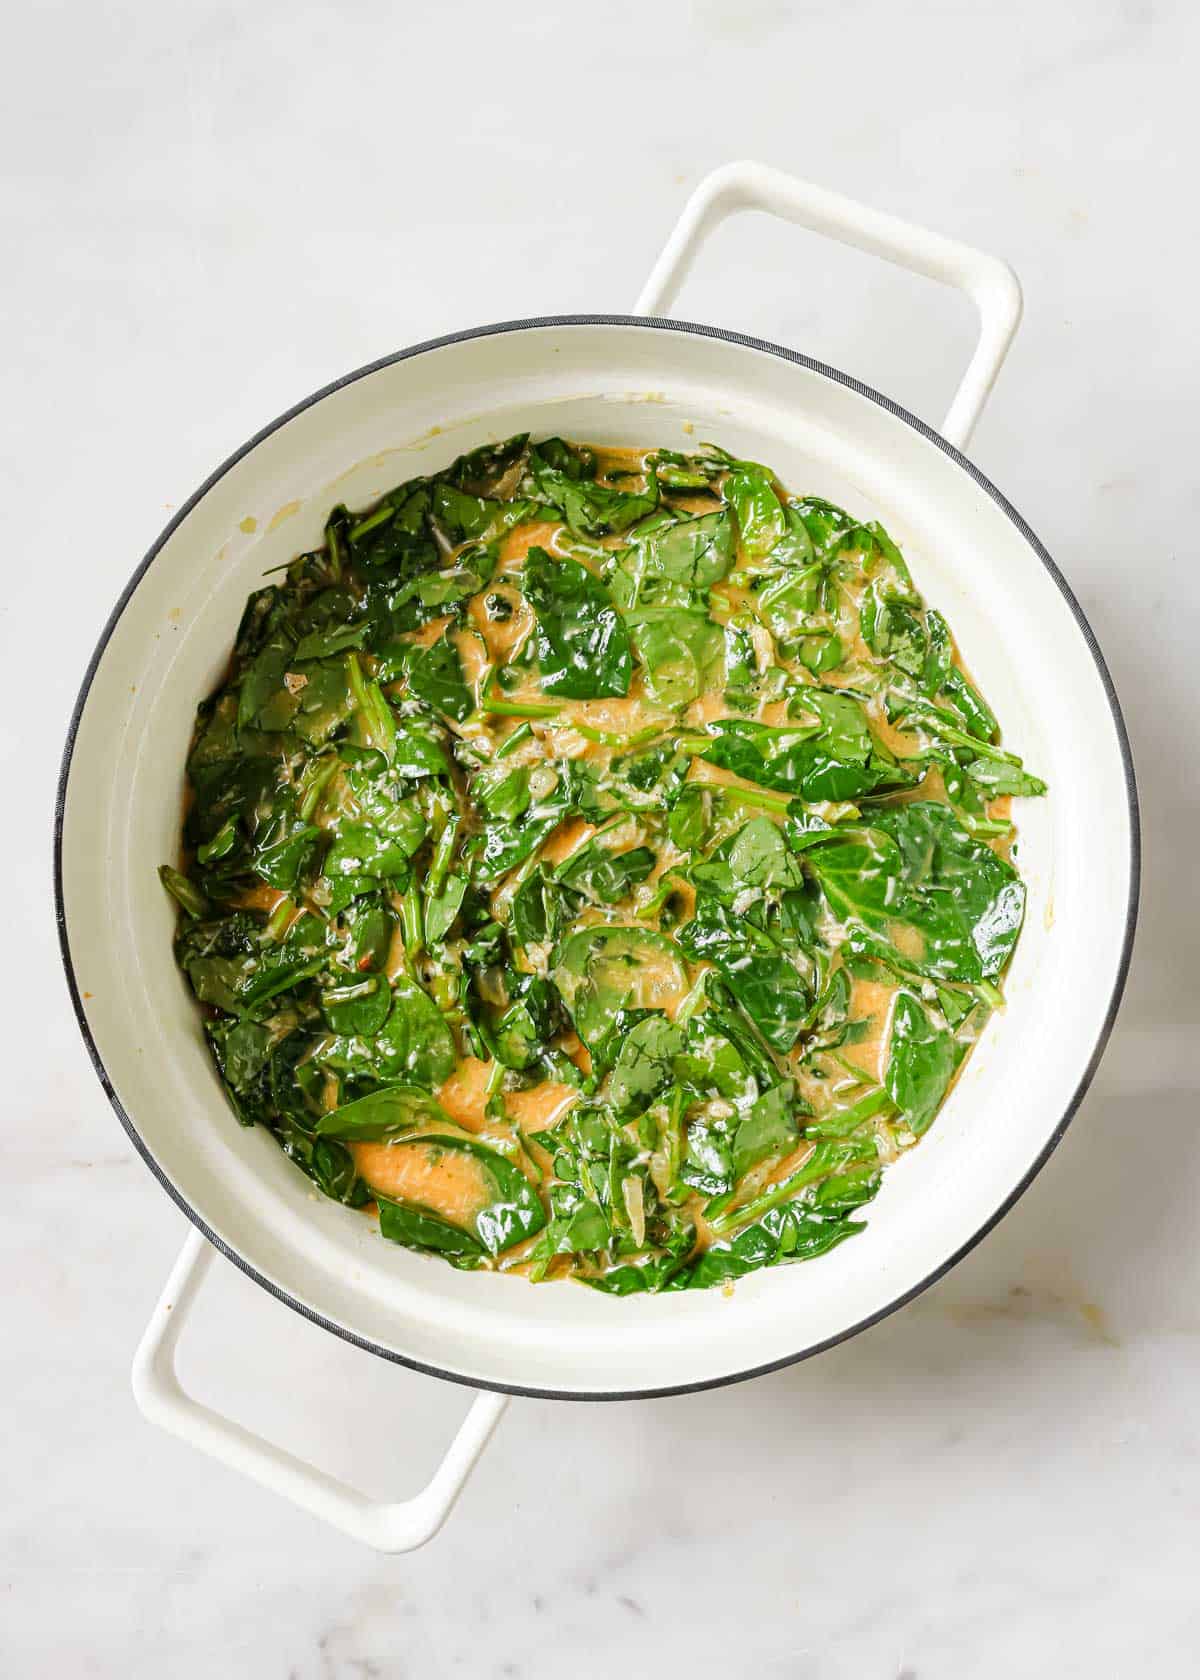 Spinach frittata mixture in a white baking dish.